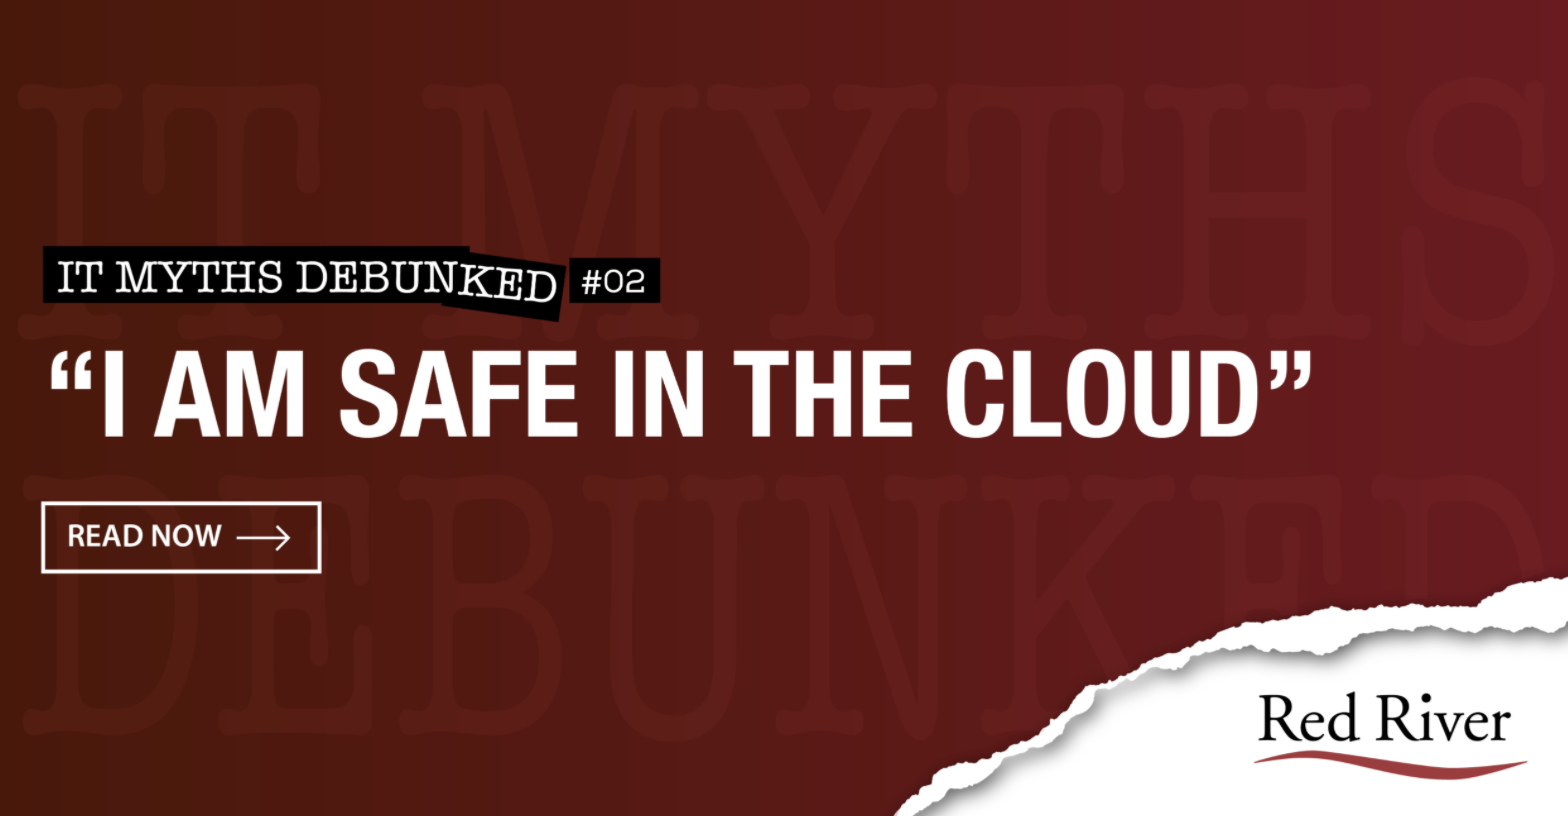 “I am safe in the cloud.” Debunked